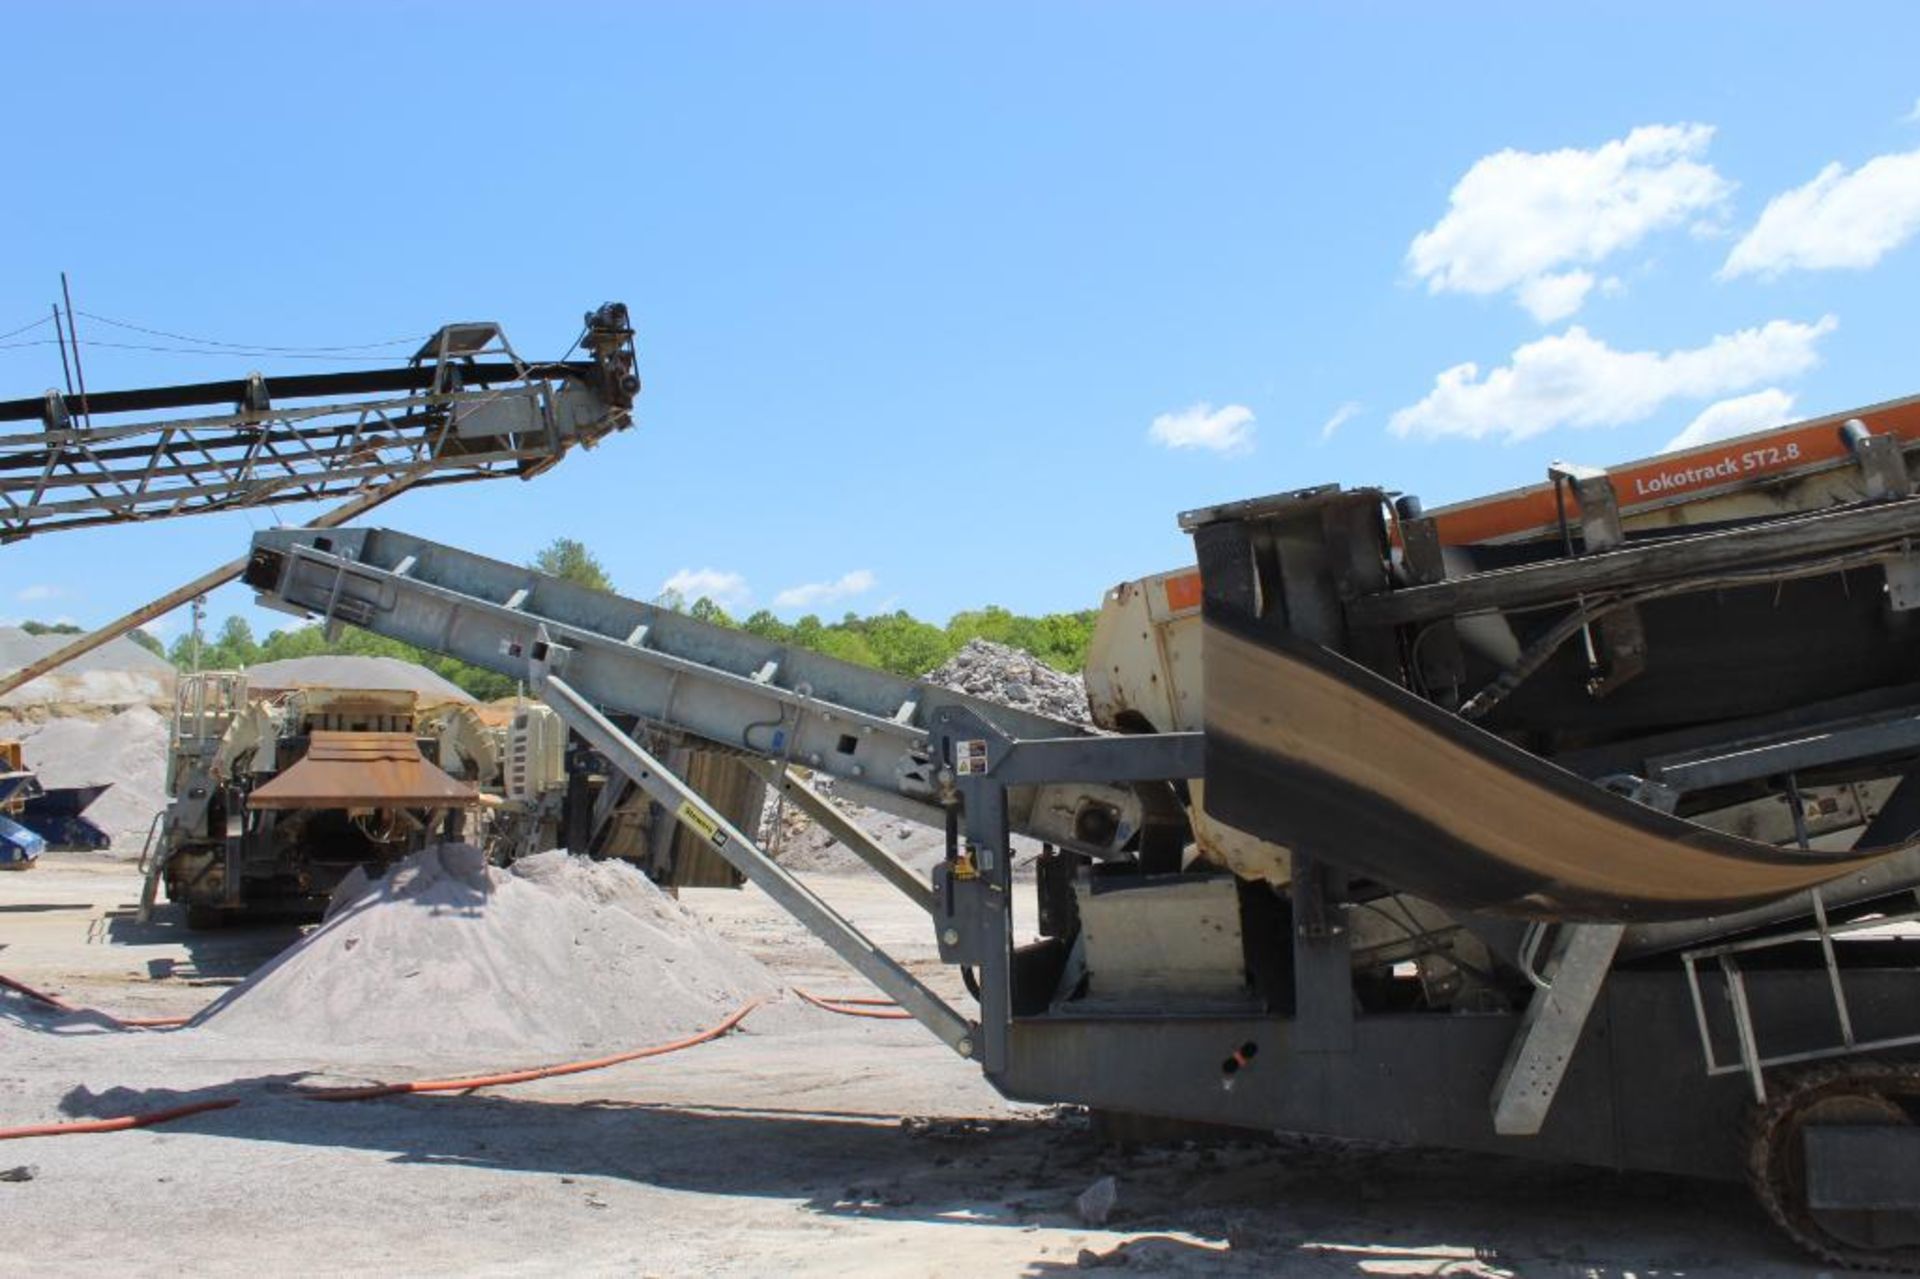 2018 Metso Mineral Lokotrack ST 2.8 Mobile Scalping Screen, Track Remote Control Movement, S/N 79728 - Image 5 of 8